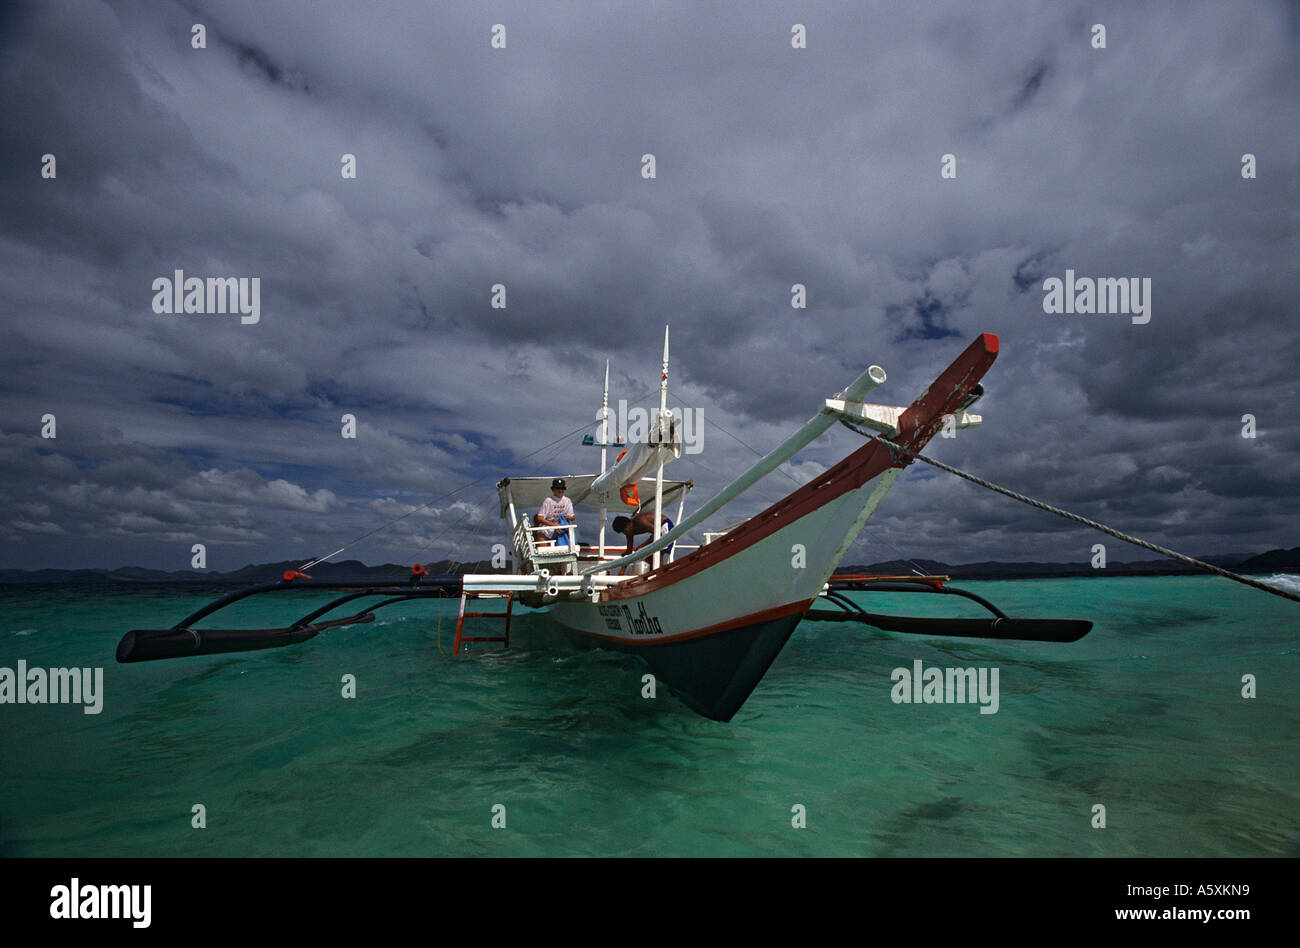 An outrigger boat in the Calamian Group (Philippines). Trimaran (outrigger boat) dans l'archipel des Calamian (Philippines). Stock Photo